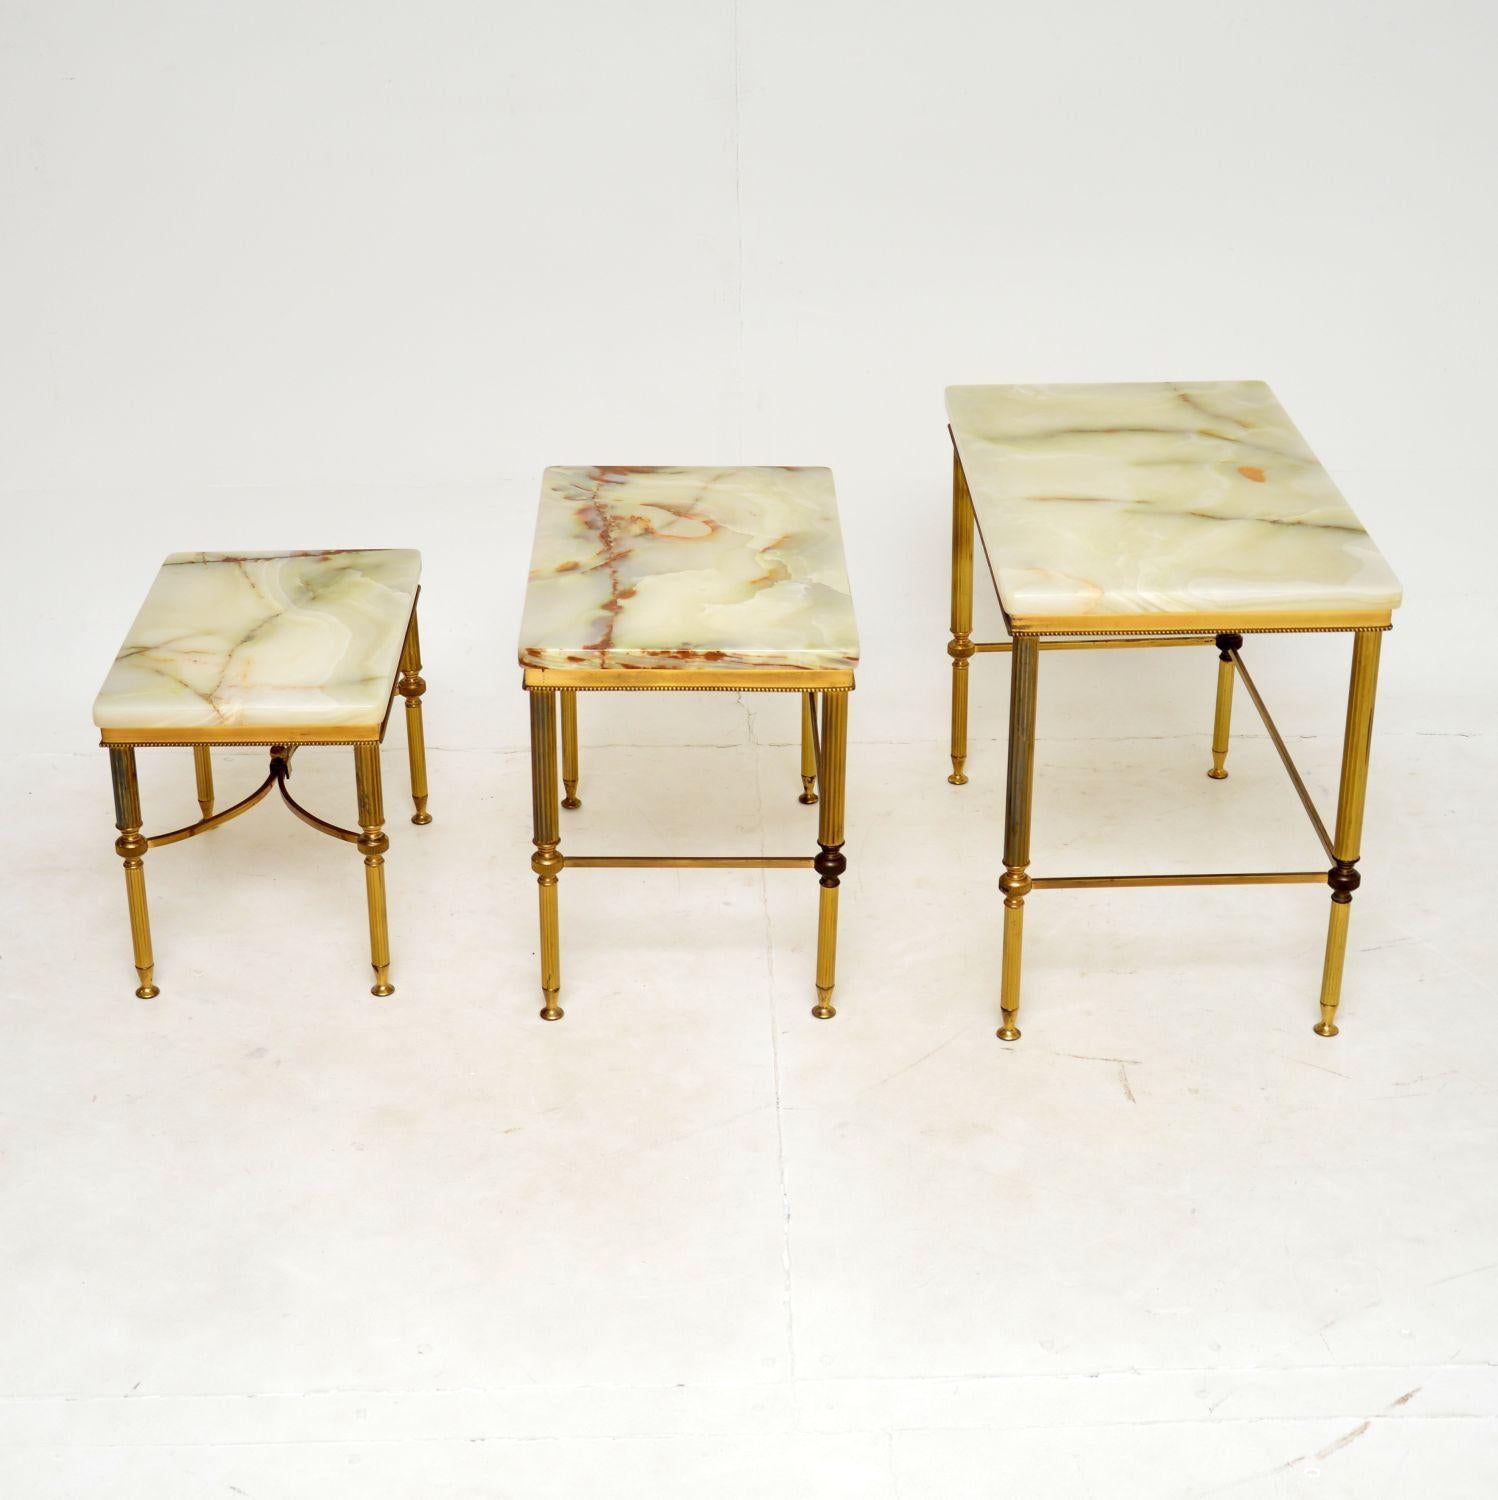 20th Century Antique French Brass & Onyx Nest of Tables